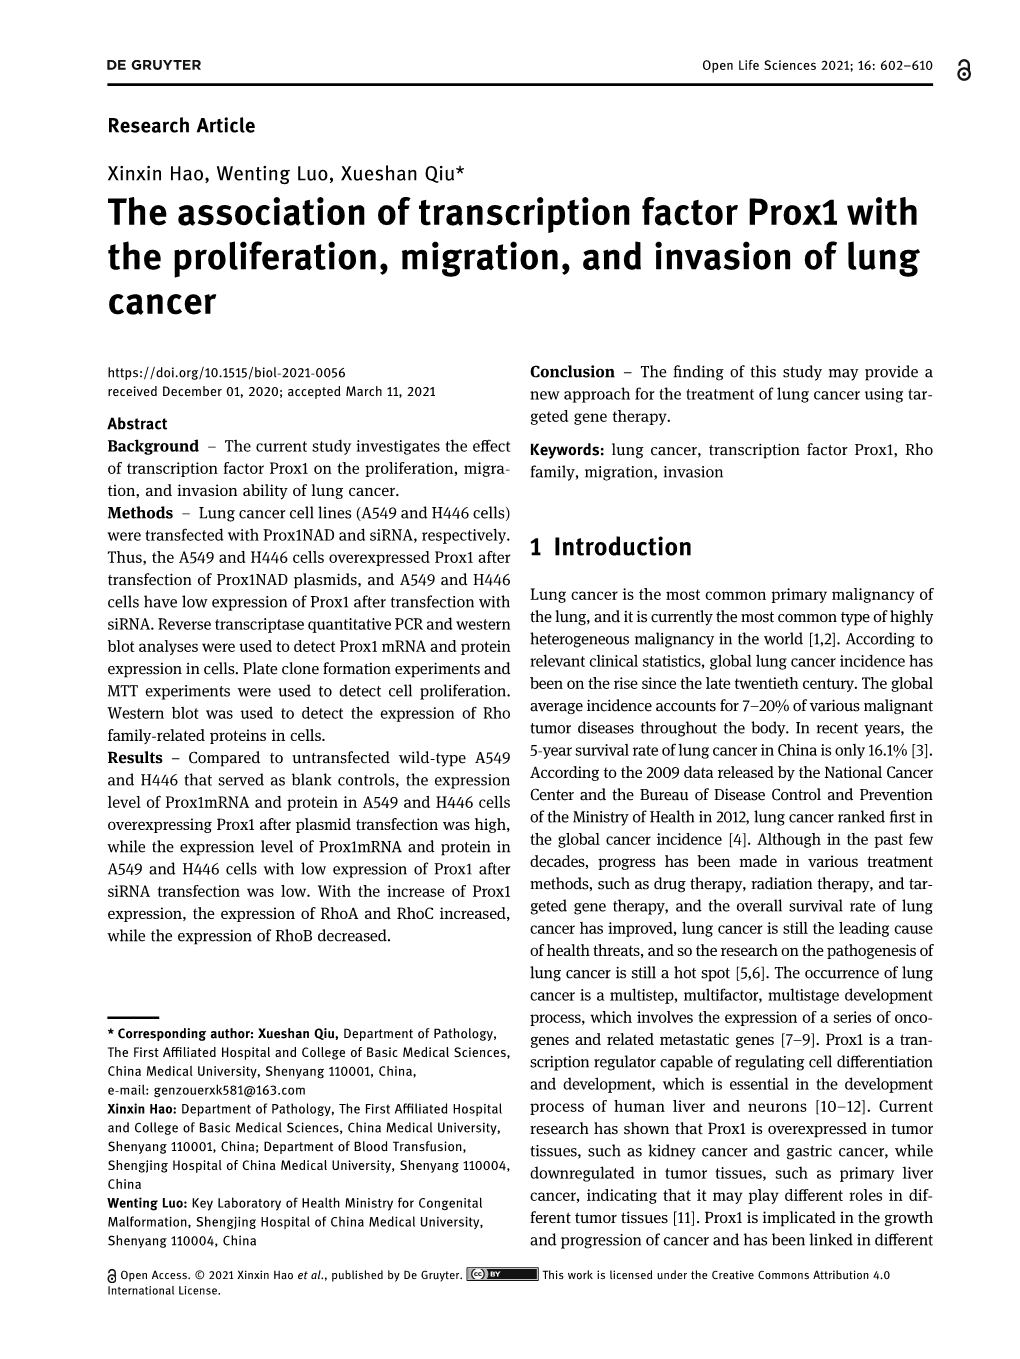 The Association of Transcription Factor Prox1 with the Proliferation, Migration, and Invasion of Lung Cancer